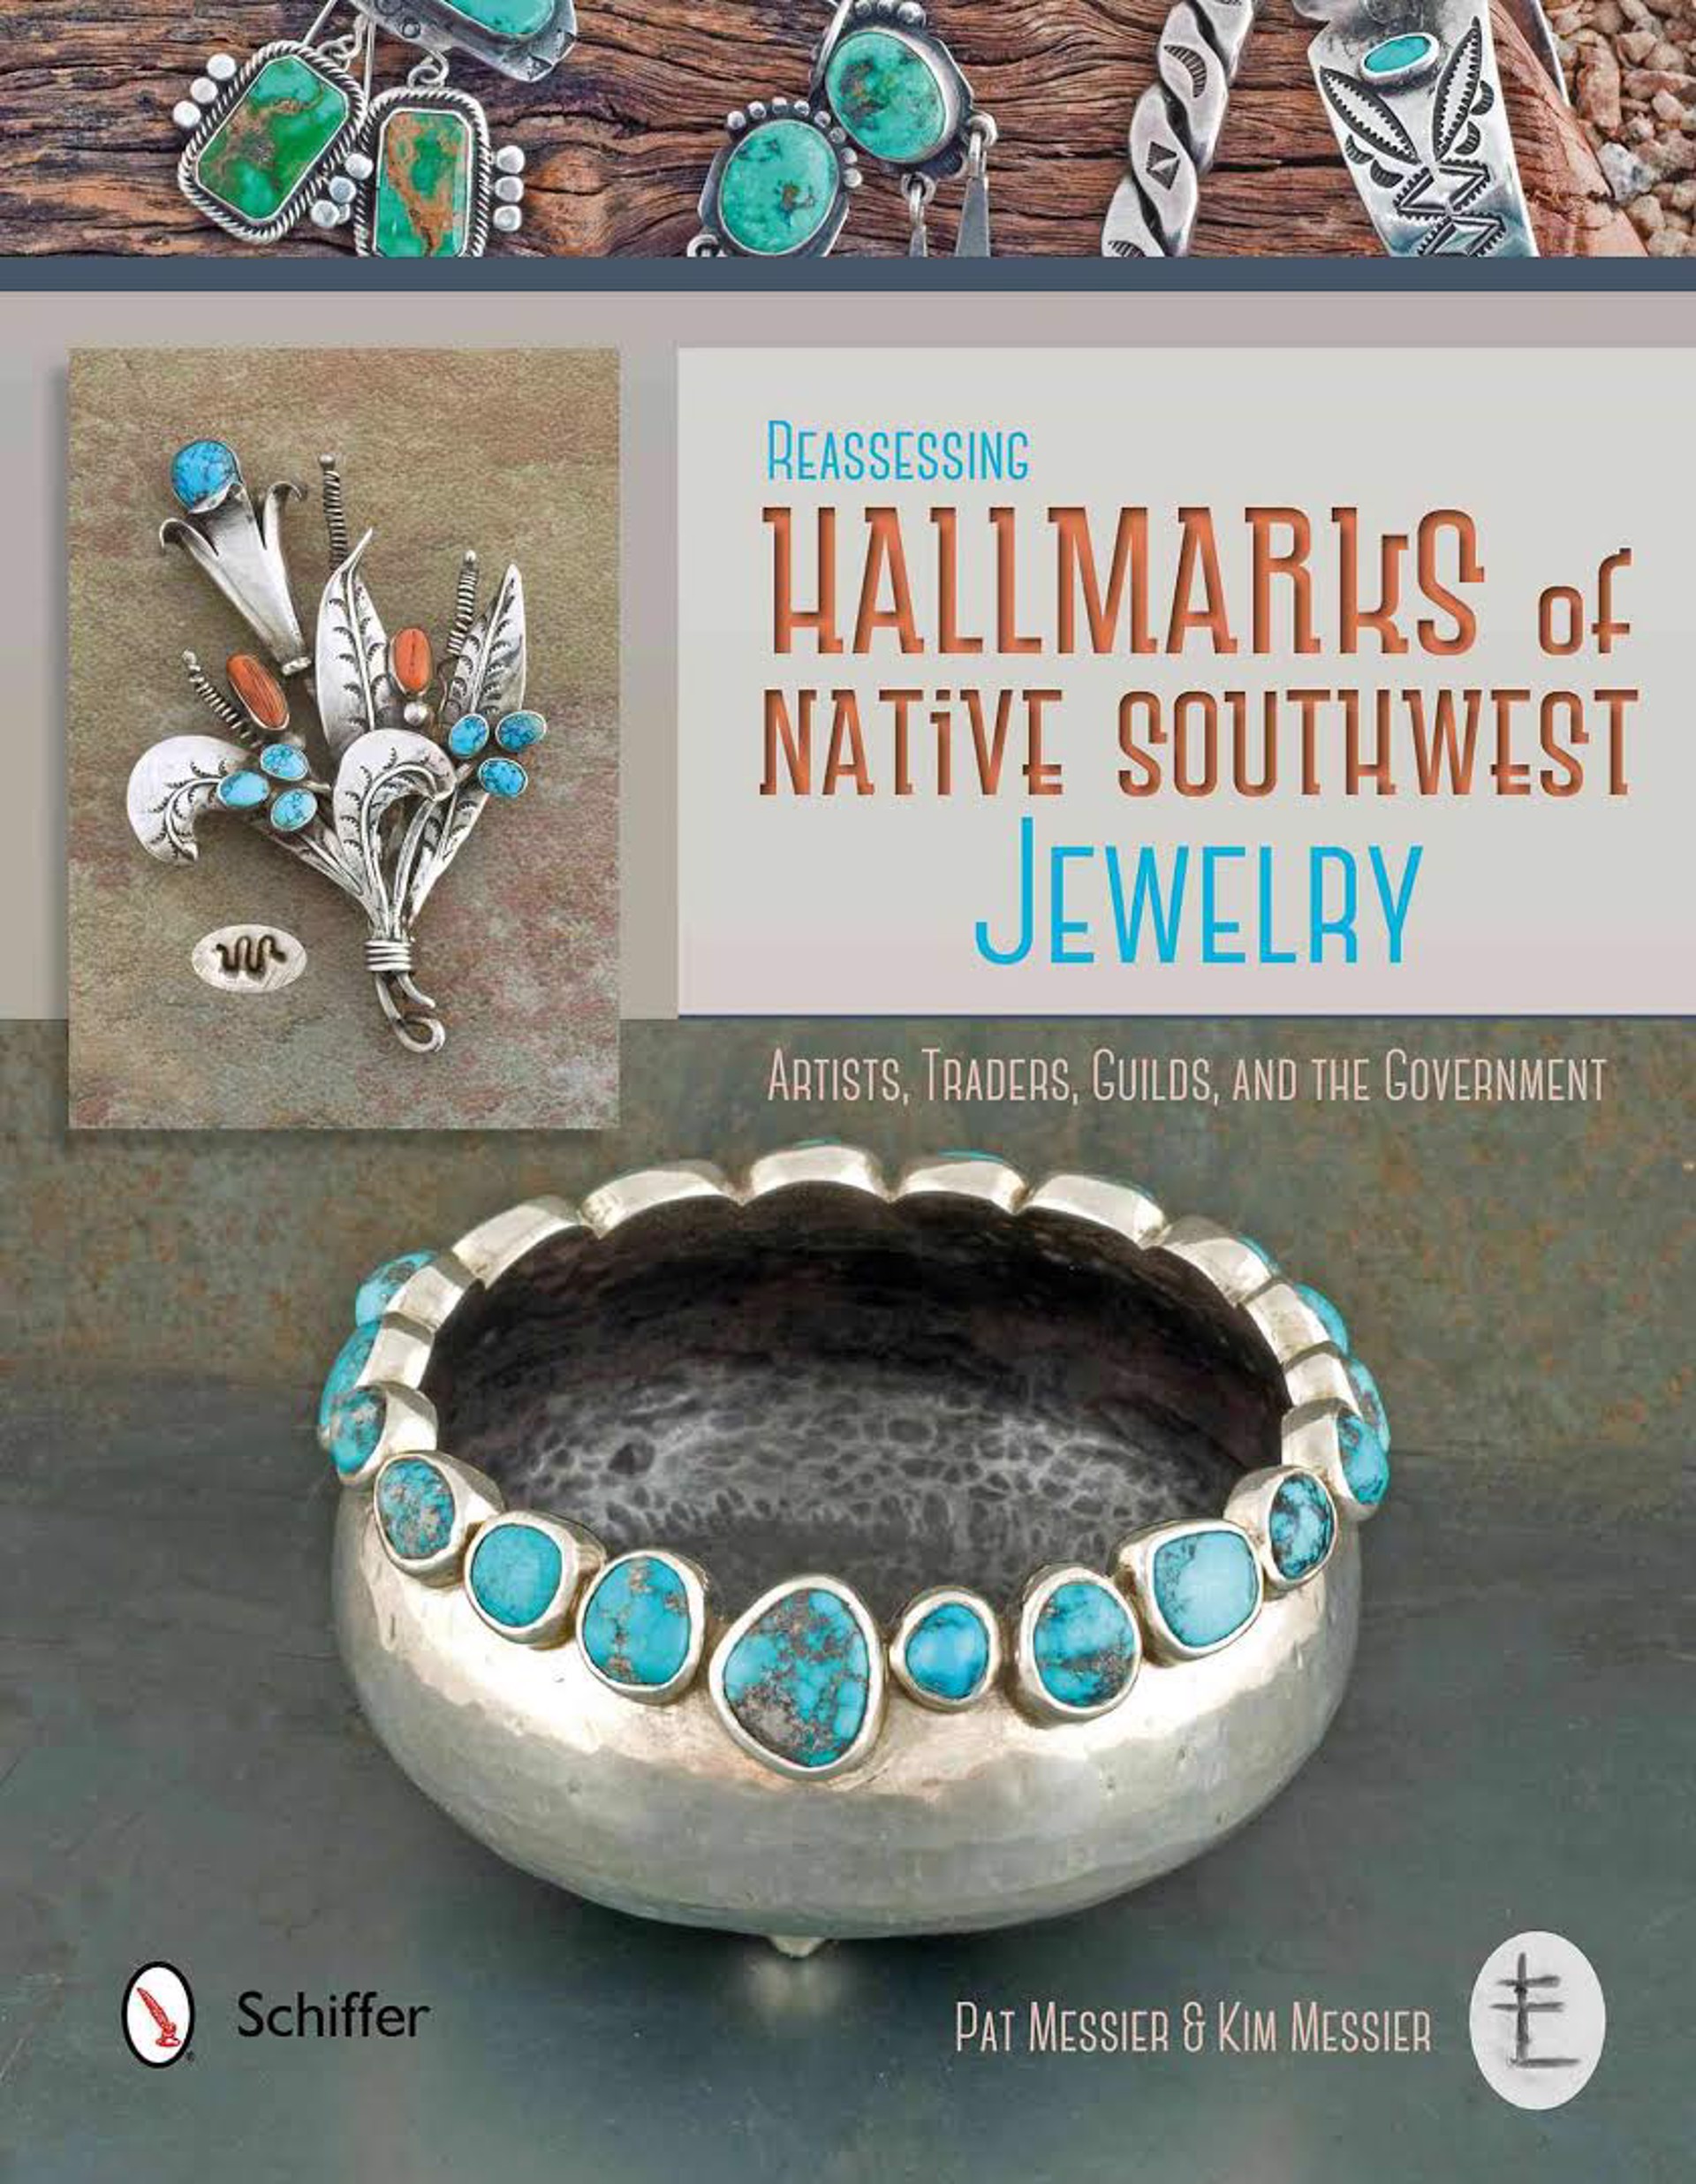 Reassessing Hallmarks of Native Southwest Jewelry by Pat Messier and Kim Messier